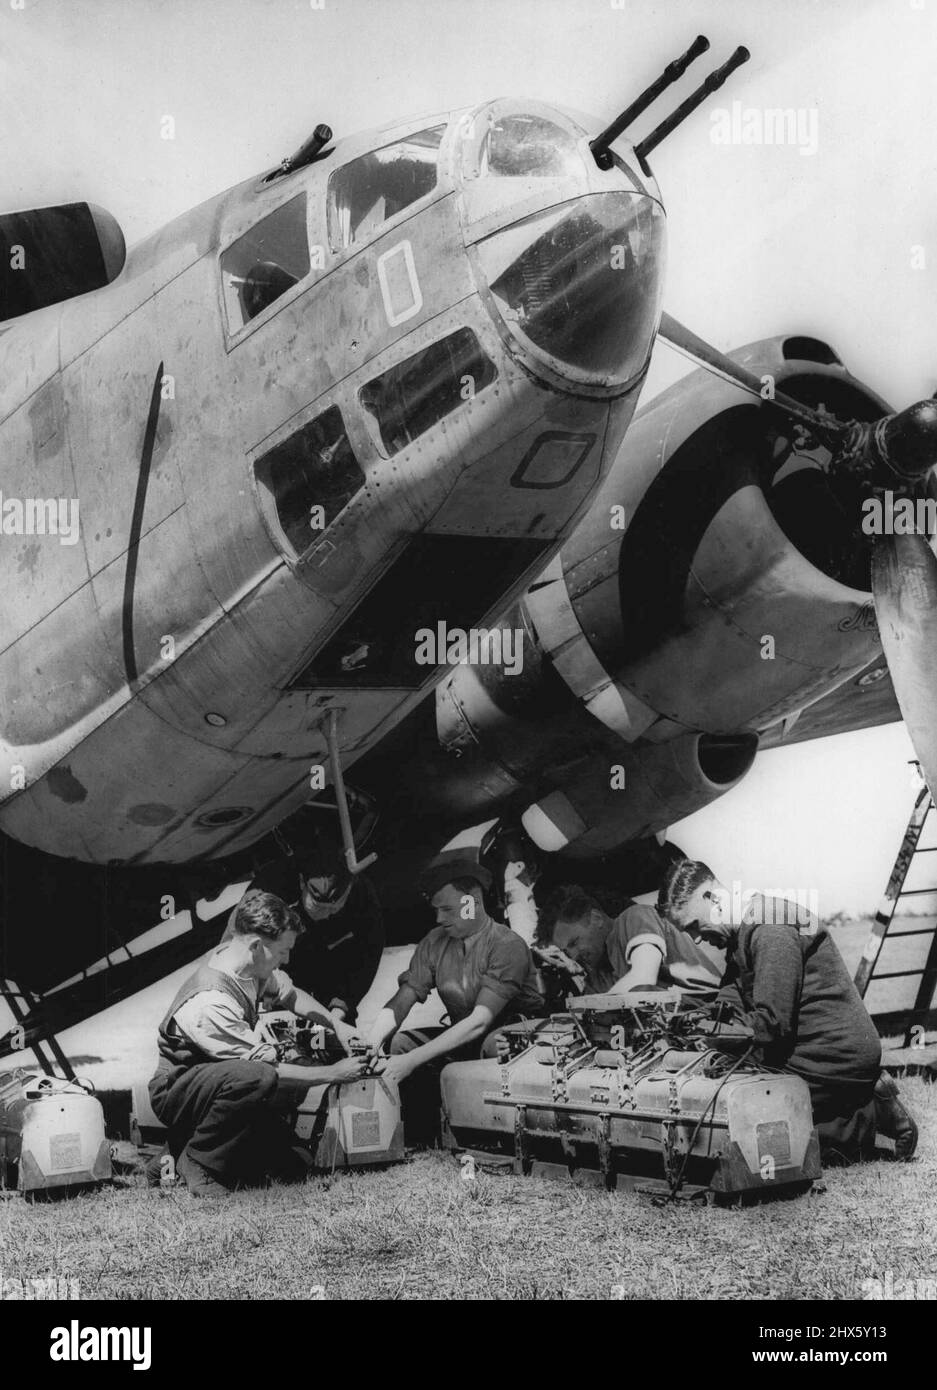 Loading The Incendiaries - Loading the incendiaries prior to a raid on enemy territory. Getting the first raising bombs into the R.A.F.'s latest Light Bomber, American produced 'Venturas' the name means 'Lucky Star', and is a fast twin engined machine, strongly armed. Hitler has recently ordered a complete overhaul of his A.R.P. Organisation. June 7, 1943. (Photo by Fox Photos).;Loading The Incendiaries - Loading the incendiaries prior to a raid on enemy territory. Getting the first raising bo Stock Photo